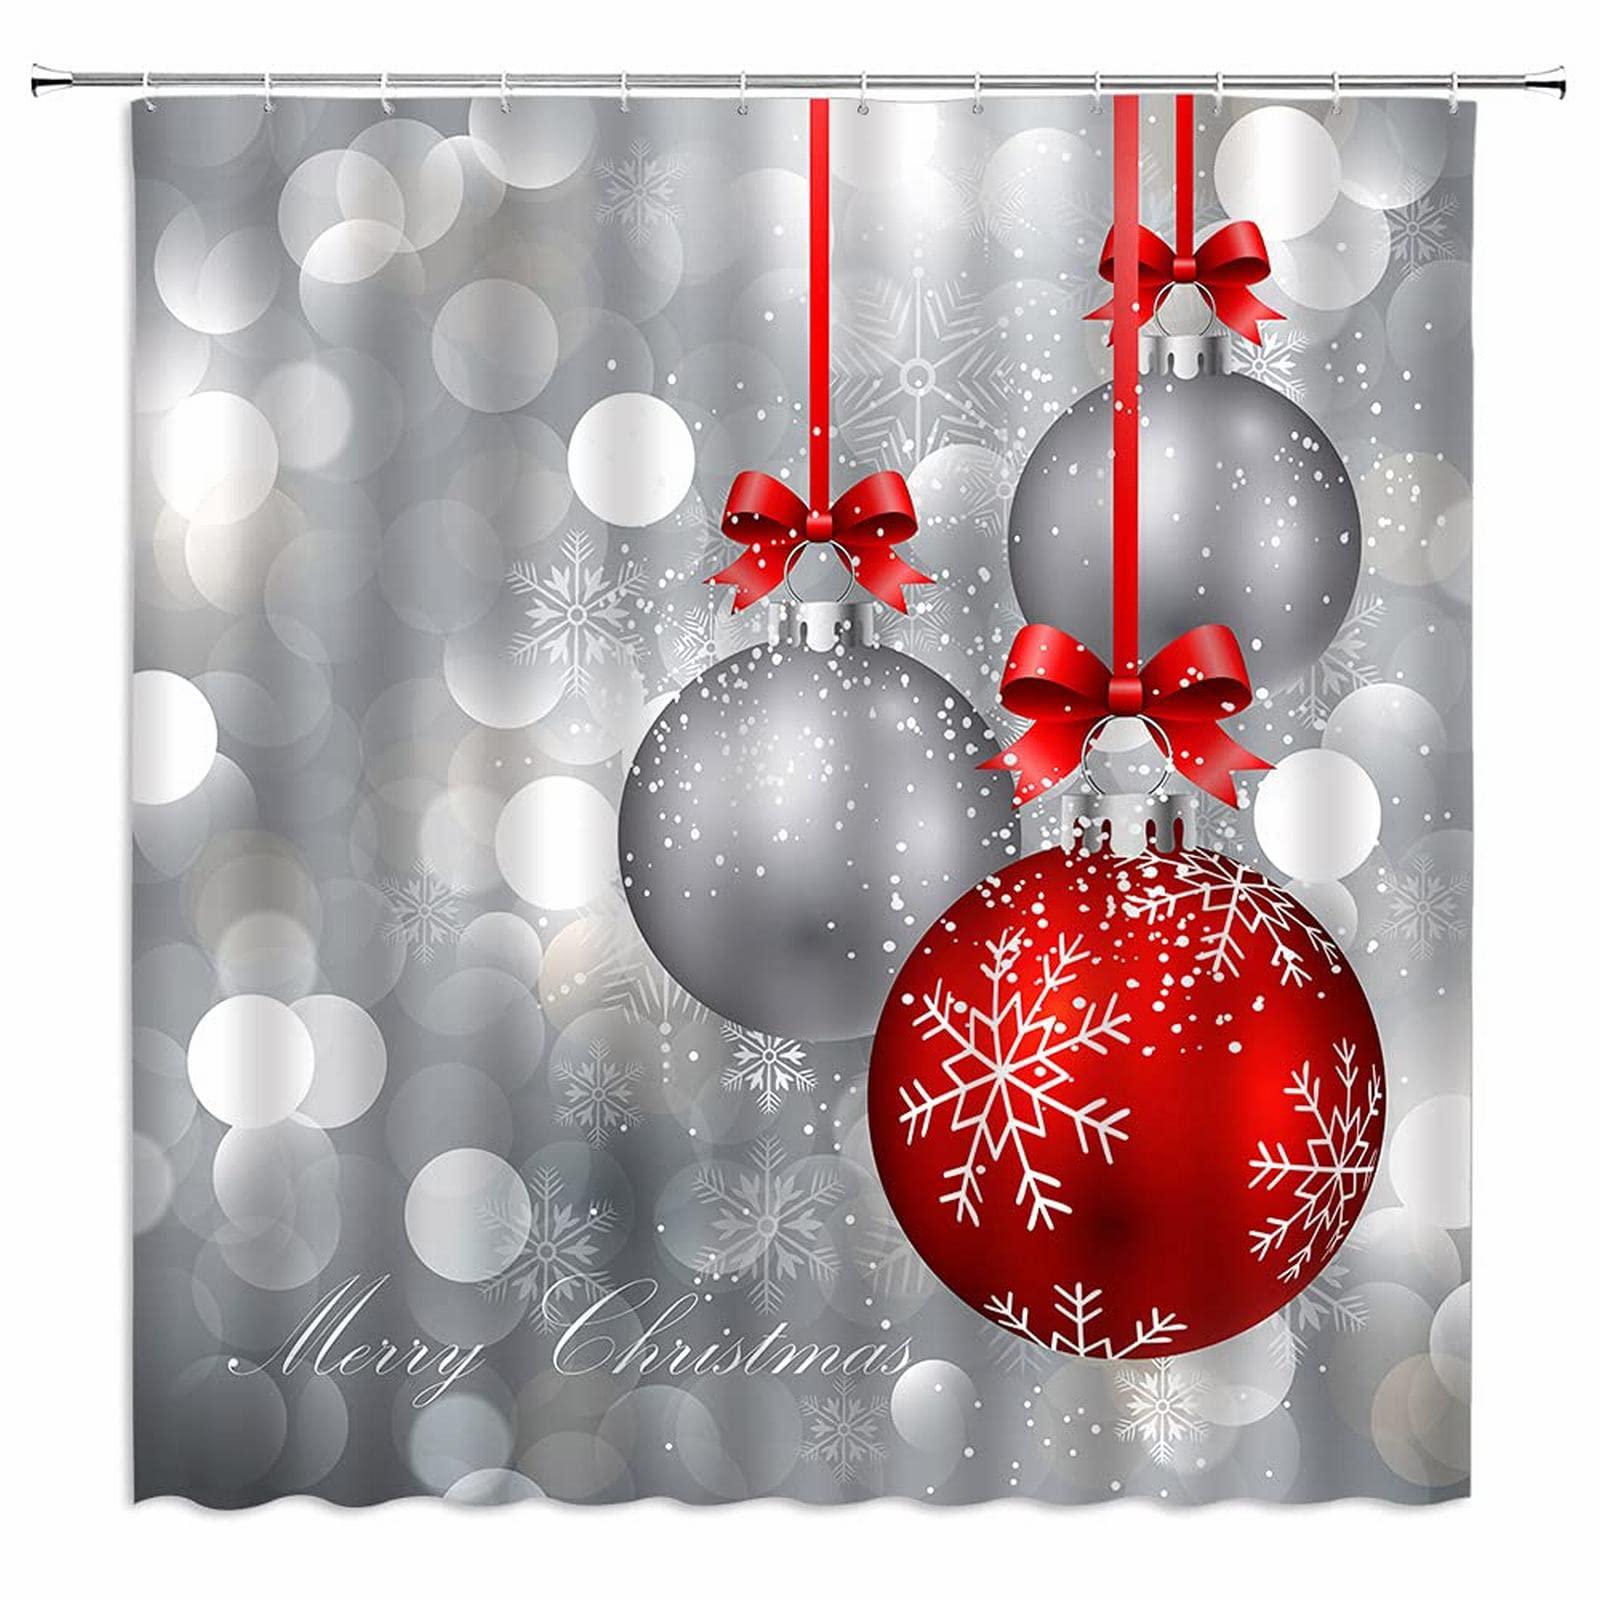 ysatnsft merry christmas shower curtain red silver christmas ball glittering bling printed happy new year holiday fabric bath